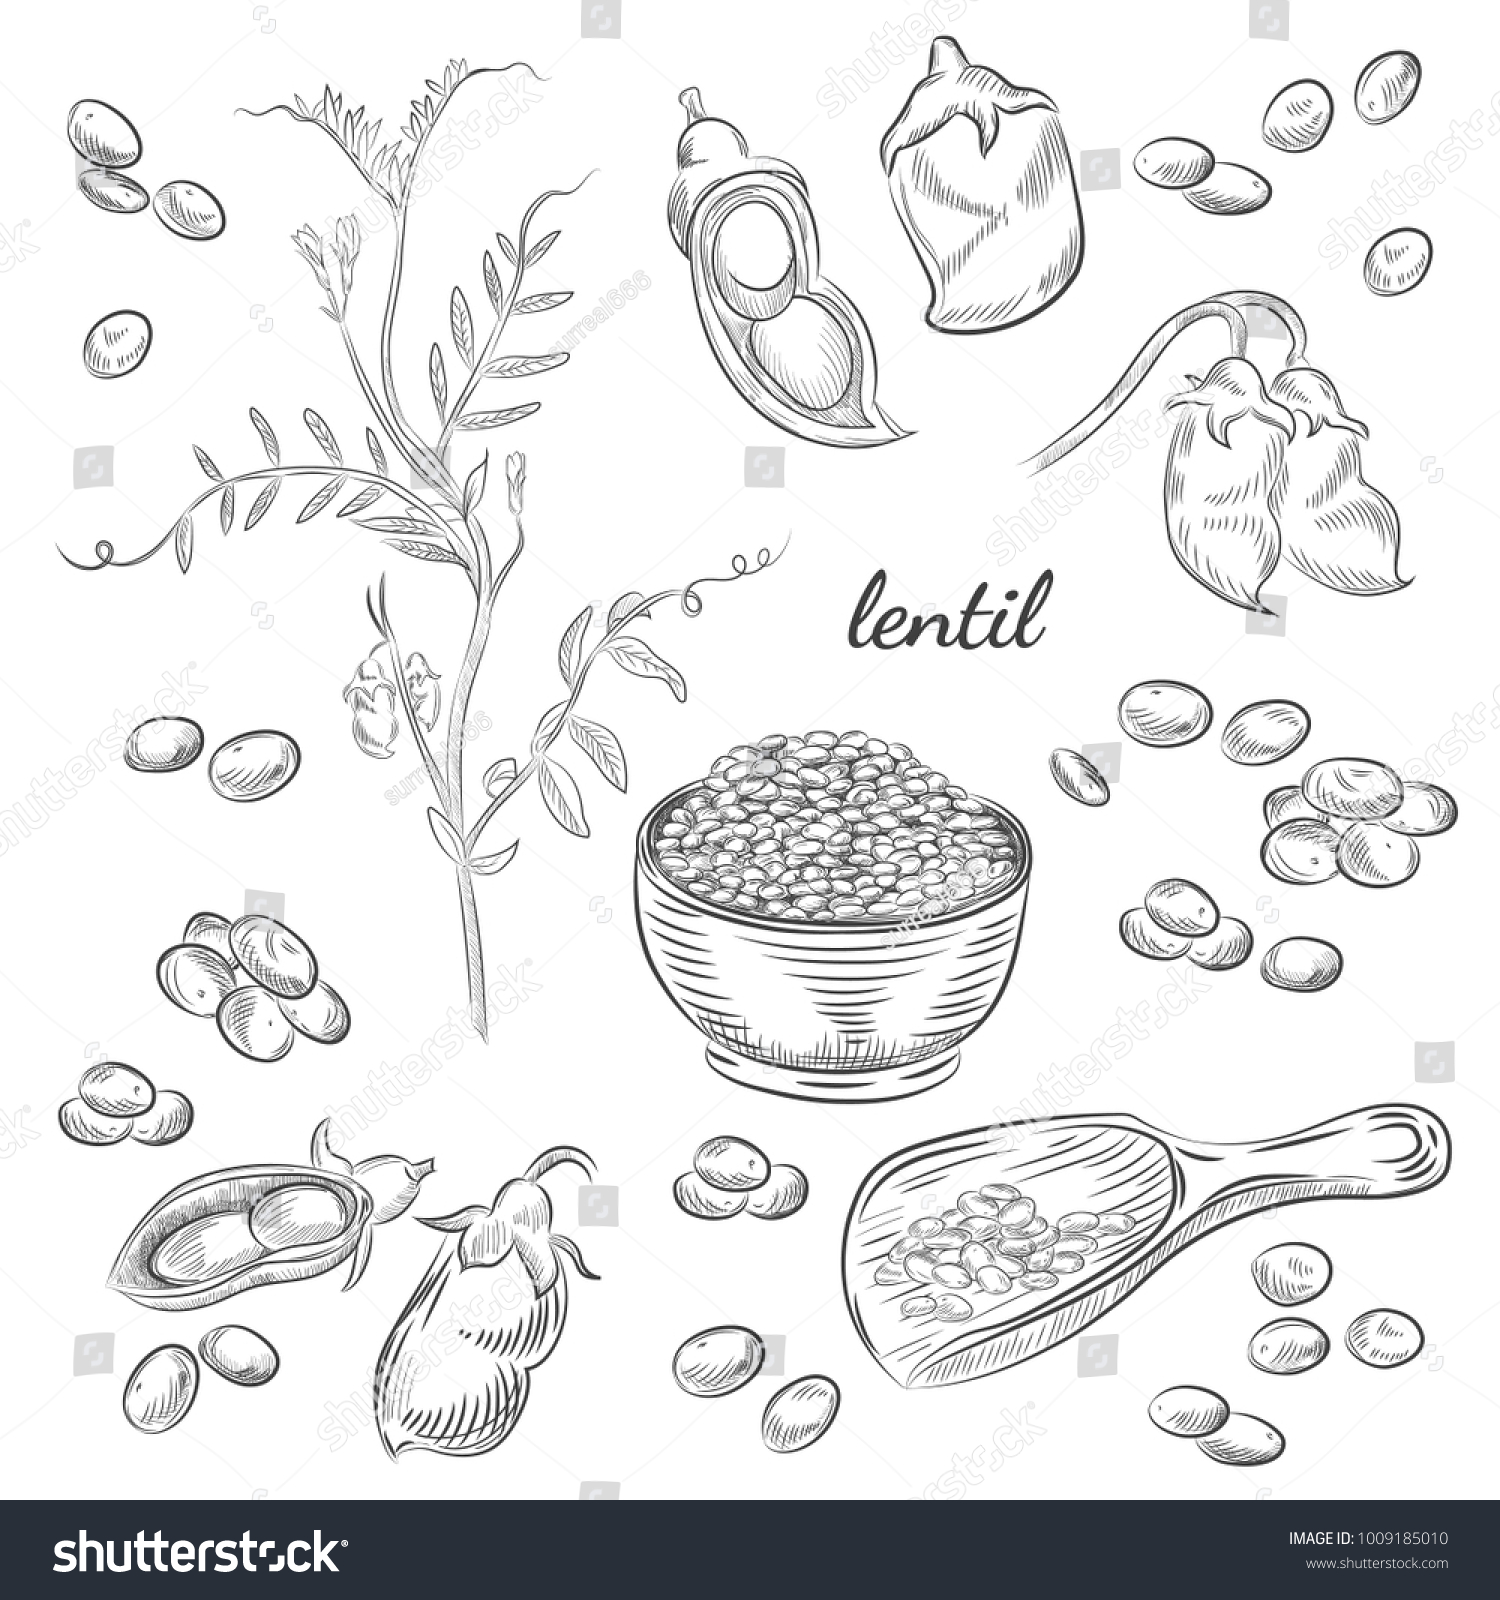 Lentil plant hand drawn illustration. Peas and pods sketches. Scoop for lentils isolated on white background. #1009185010